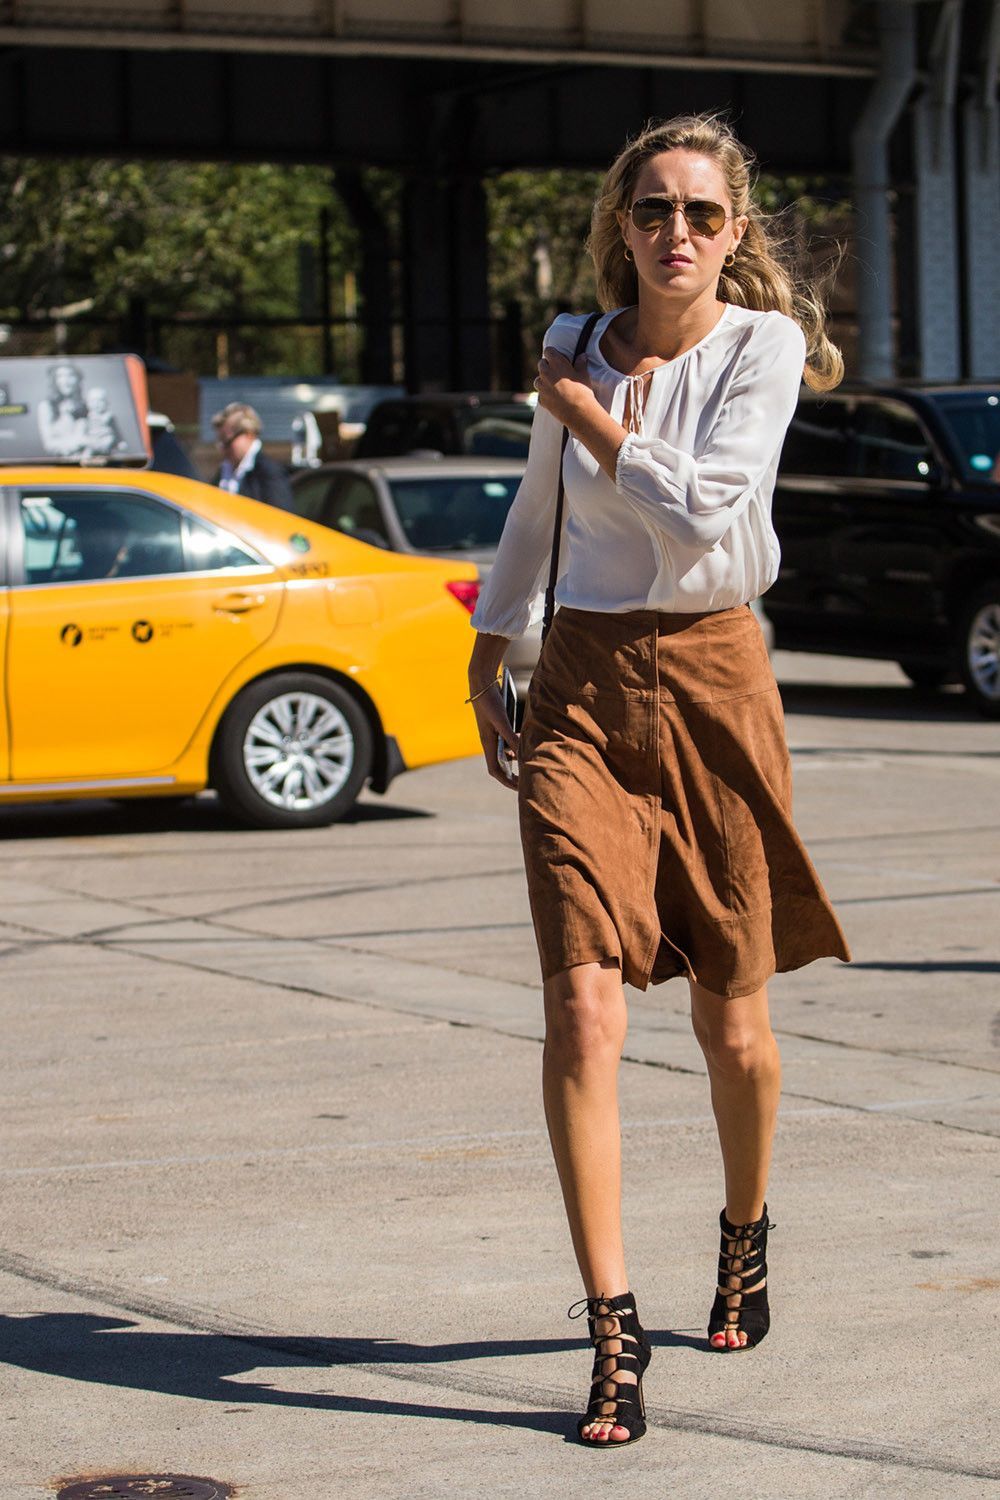 The shameless guide to getting photographed for street style during ...